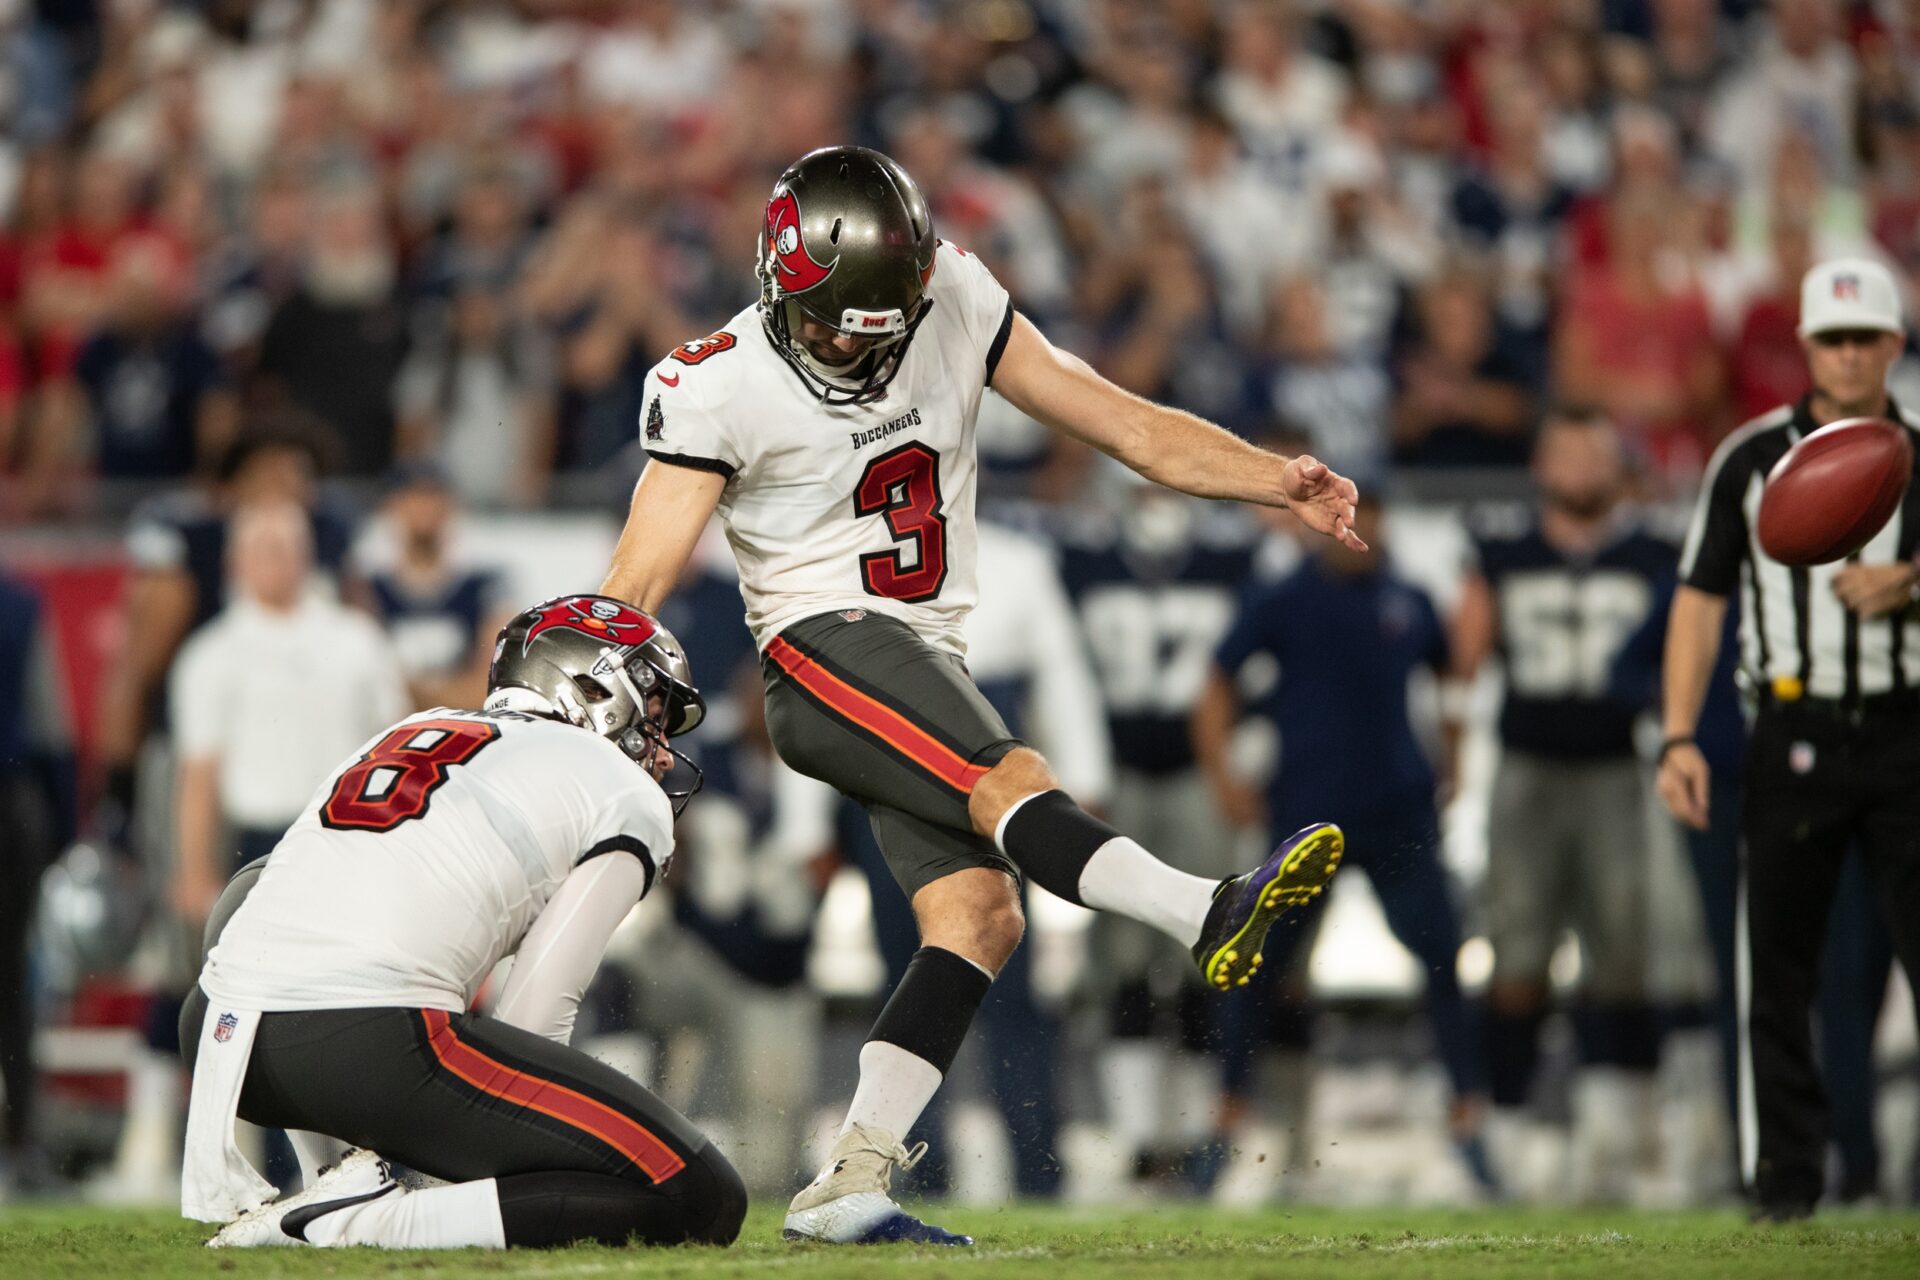 Tampa Bay Buccaneers kicker Ryan Succop (3) kicks the game winning field goal against the Dallas Cowboys in the fourth quarter at Raymond James Stadium.